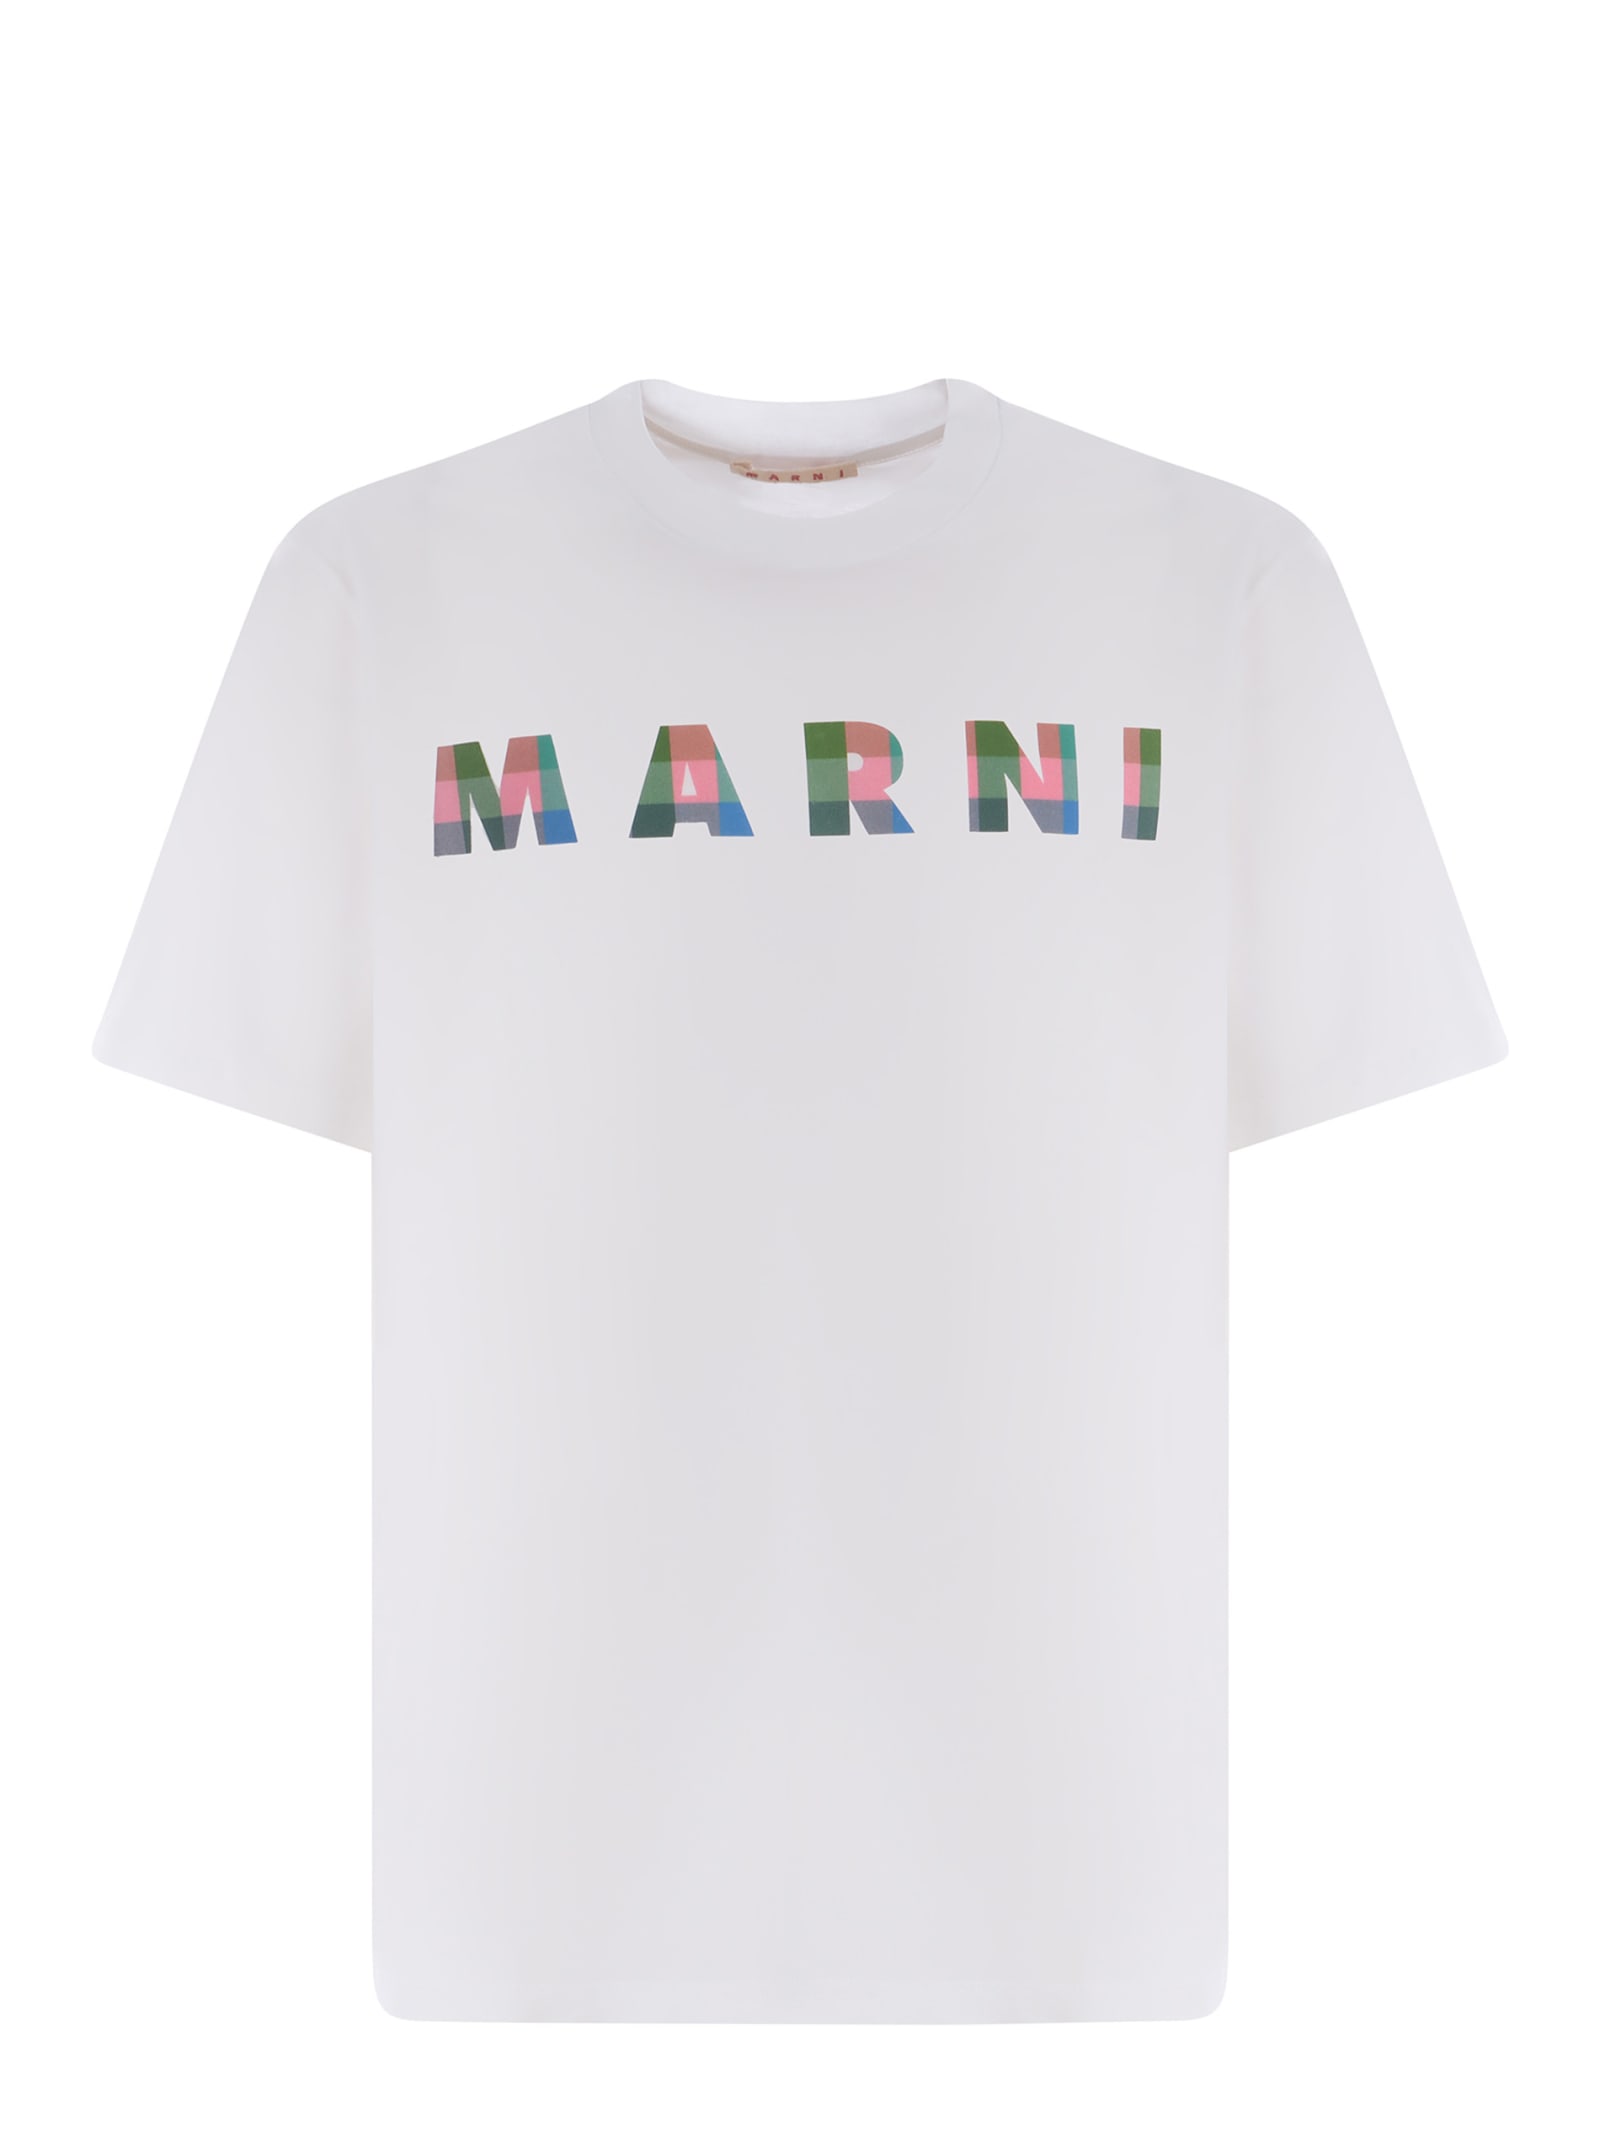 Shop Marni T-shirt  Made Of Cotton In White